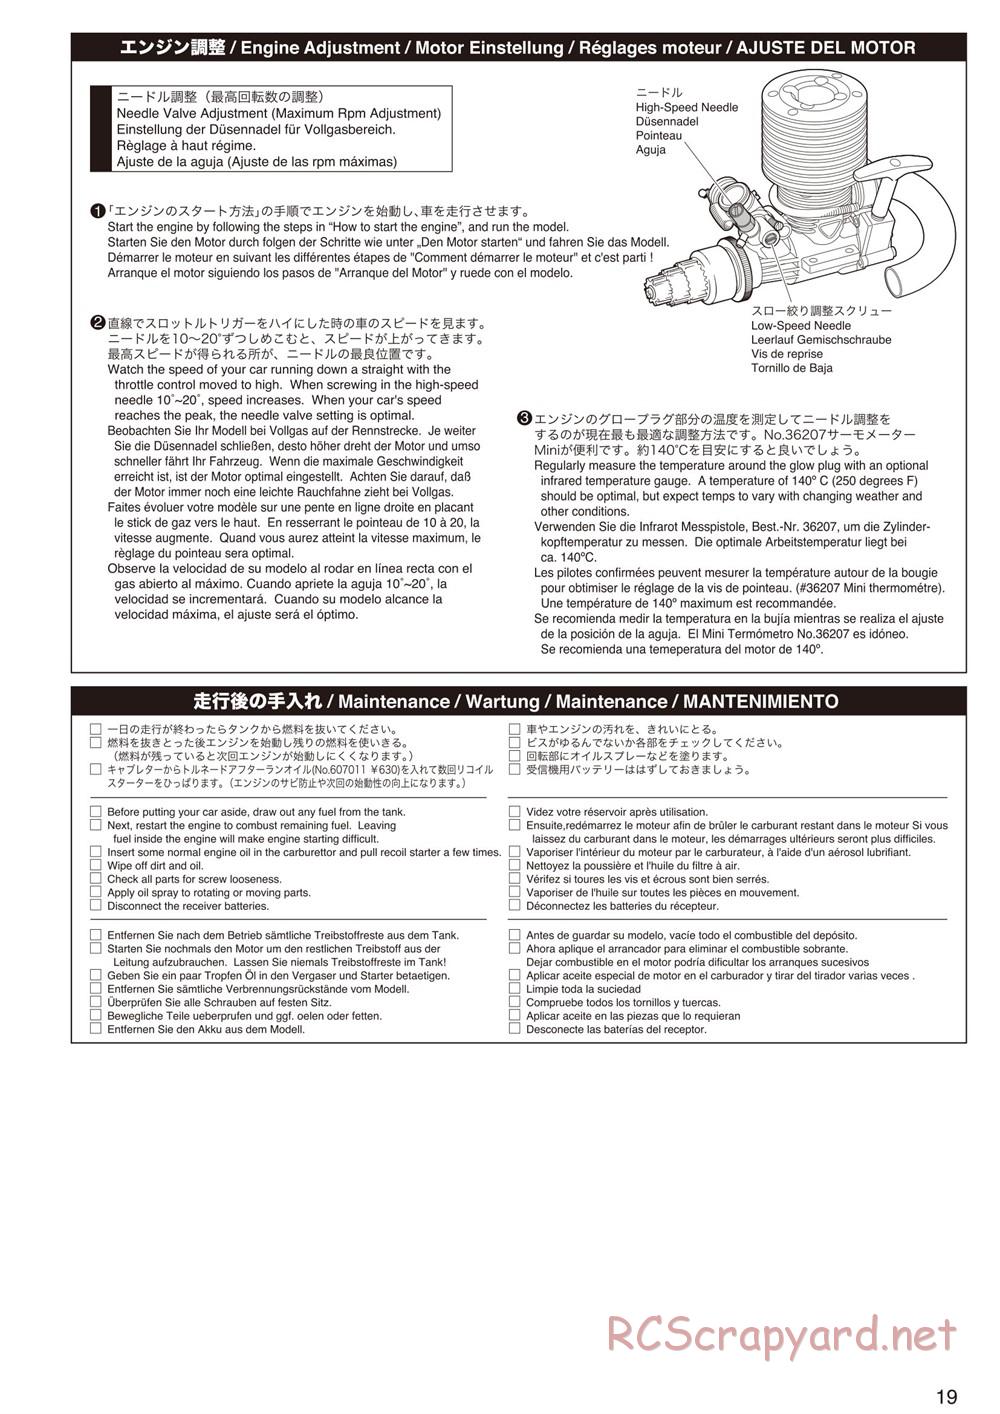 Kyosho - Mad Force Cruiser - Manual - Page 19